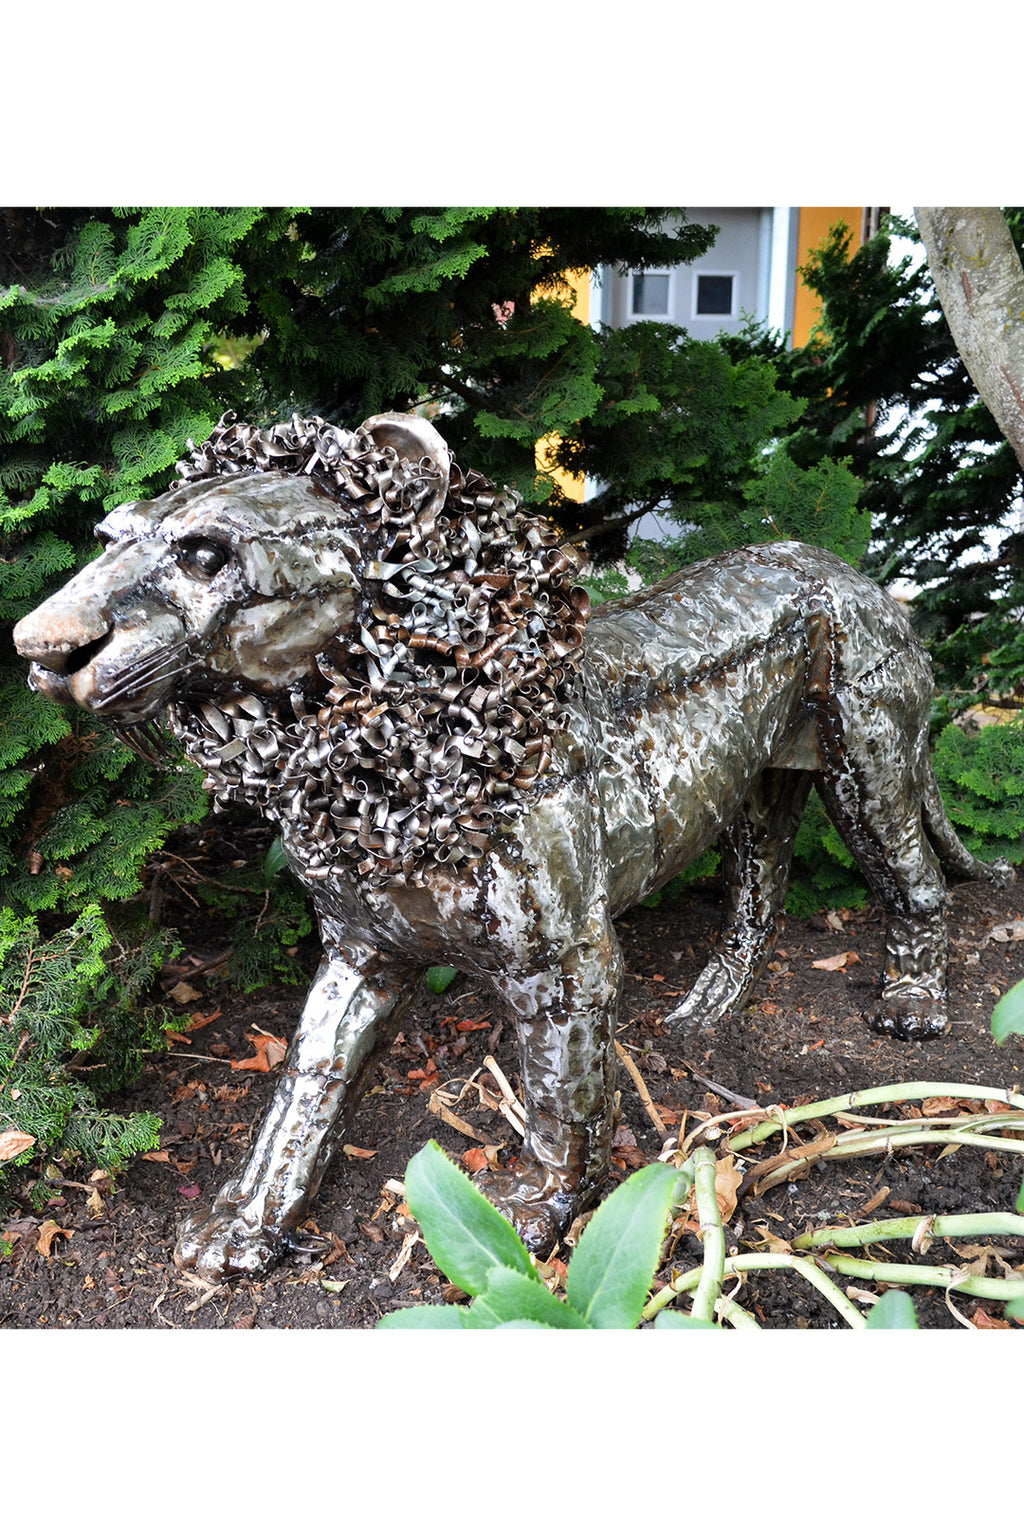 Kenyan Recycled Oil Drum Lion Statue